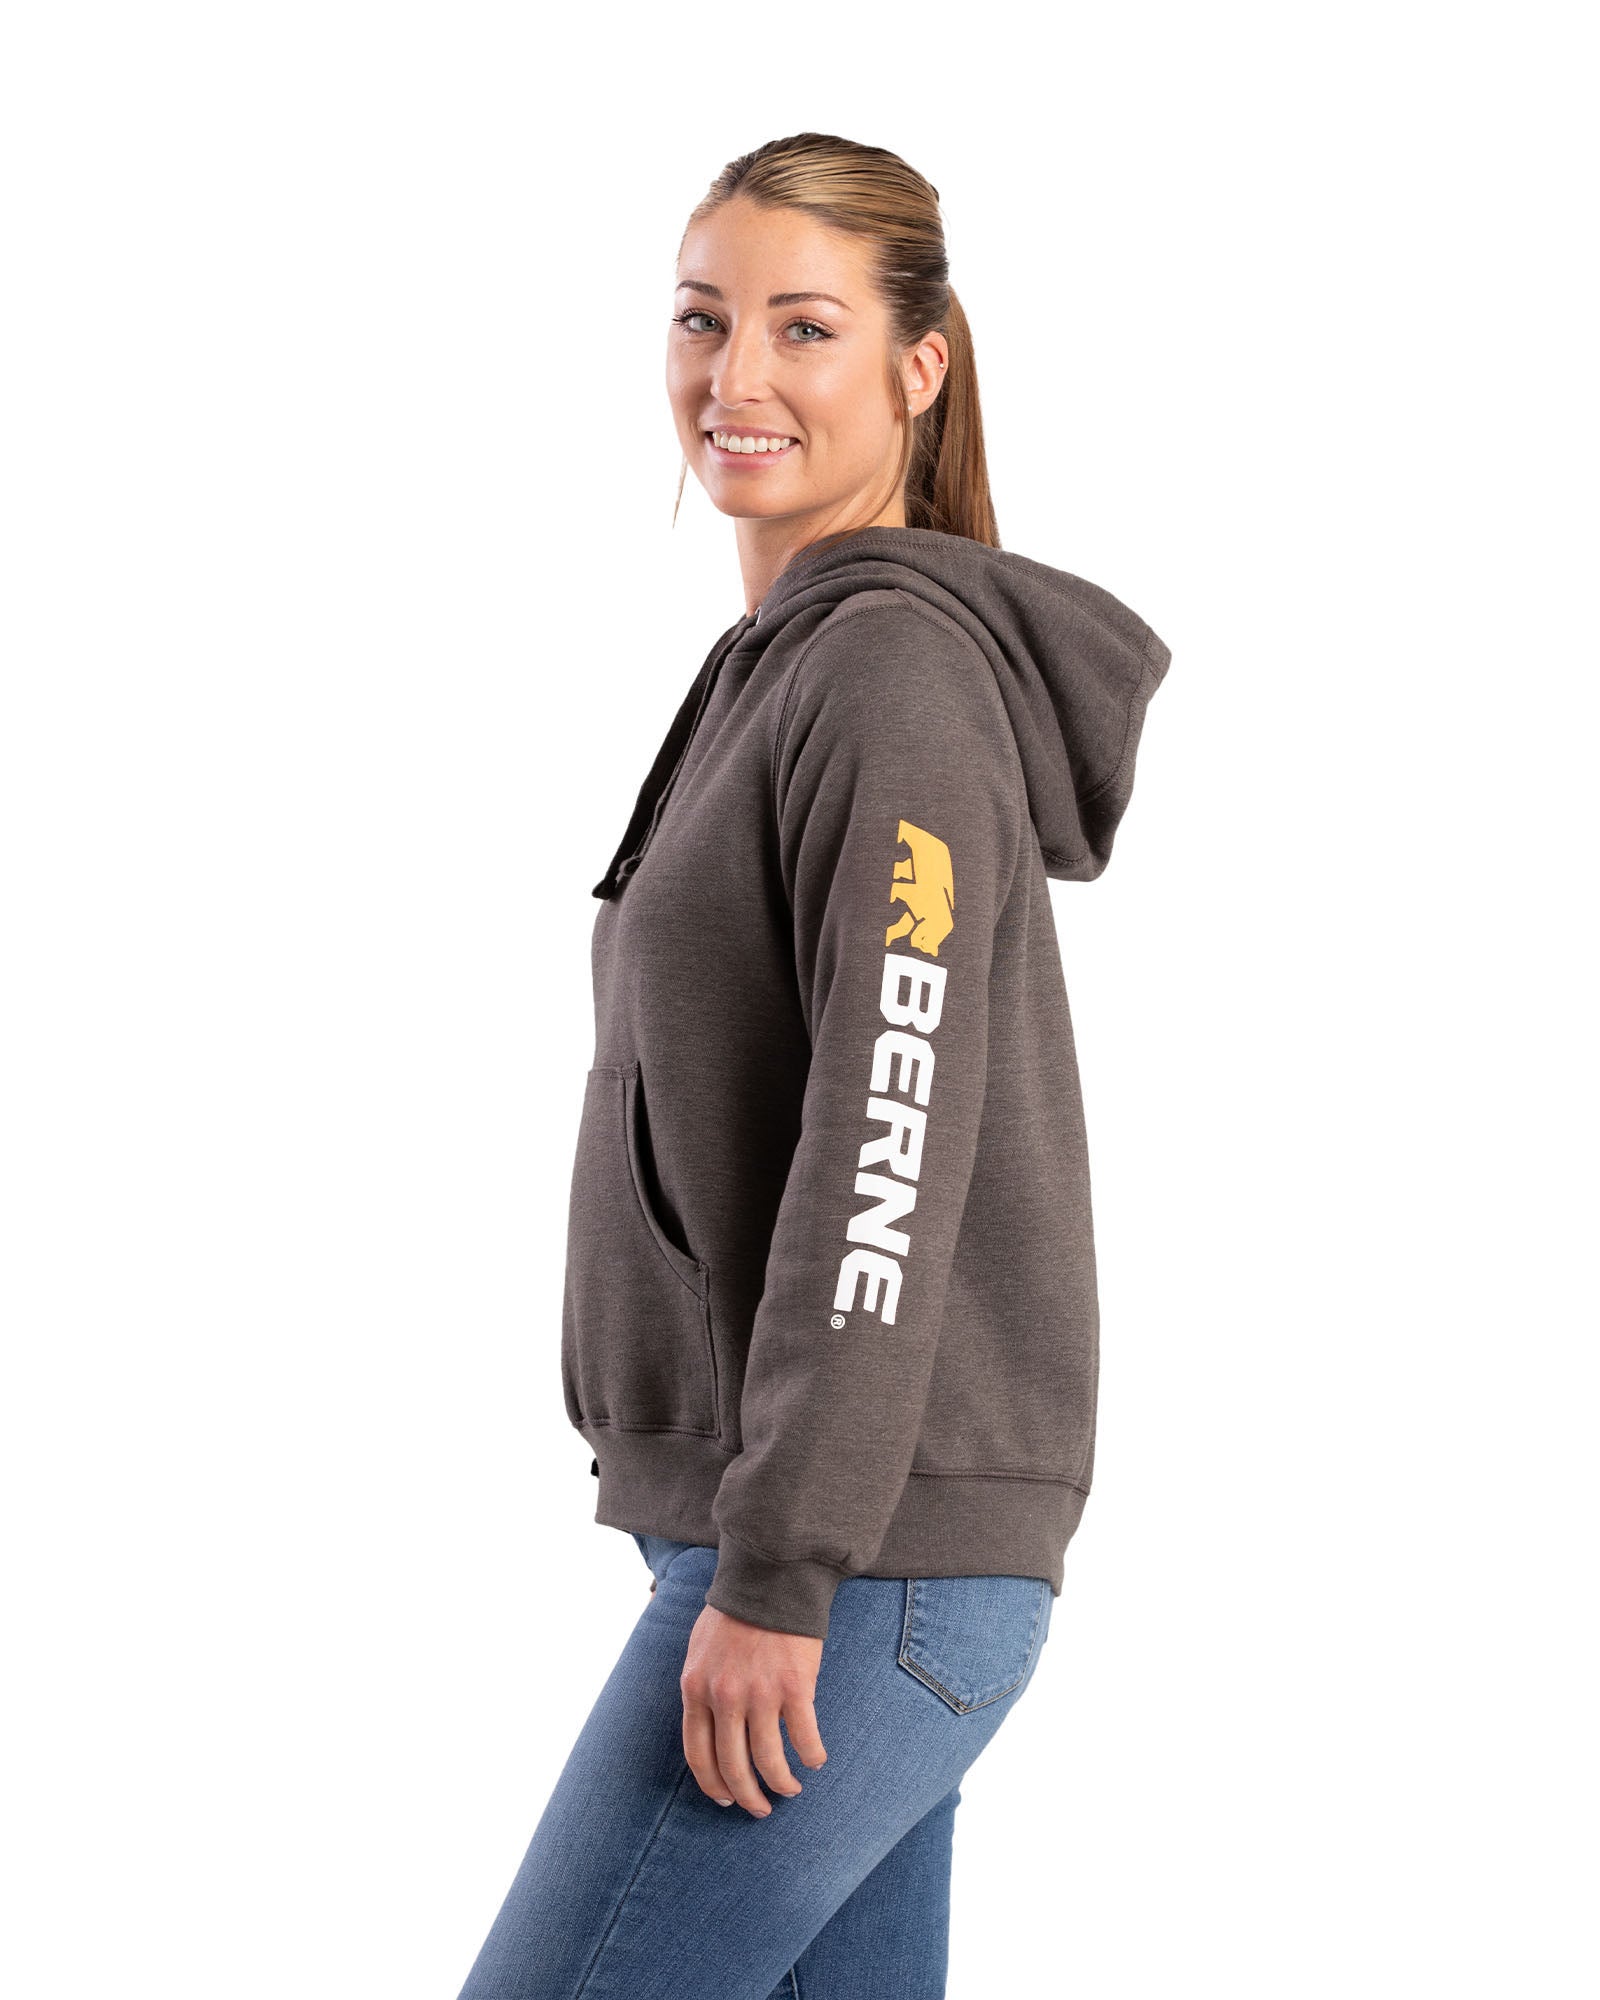 WSP401GPH Women's Signature Sleeve Hooded Pullover